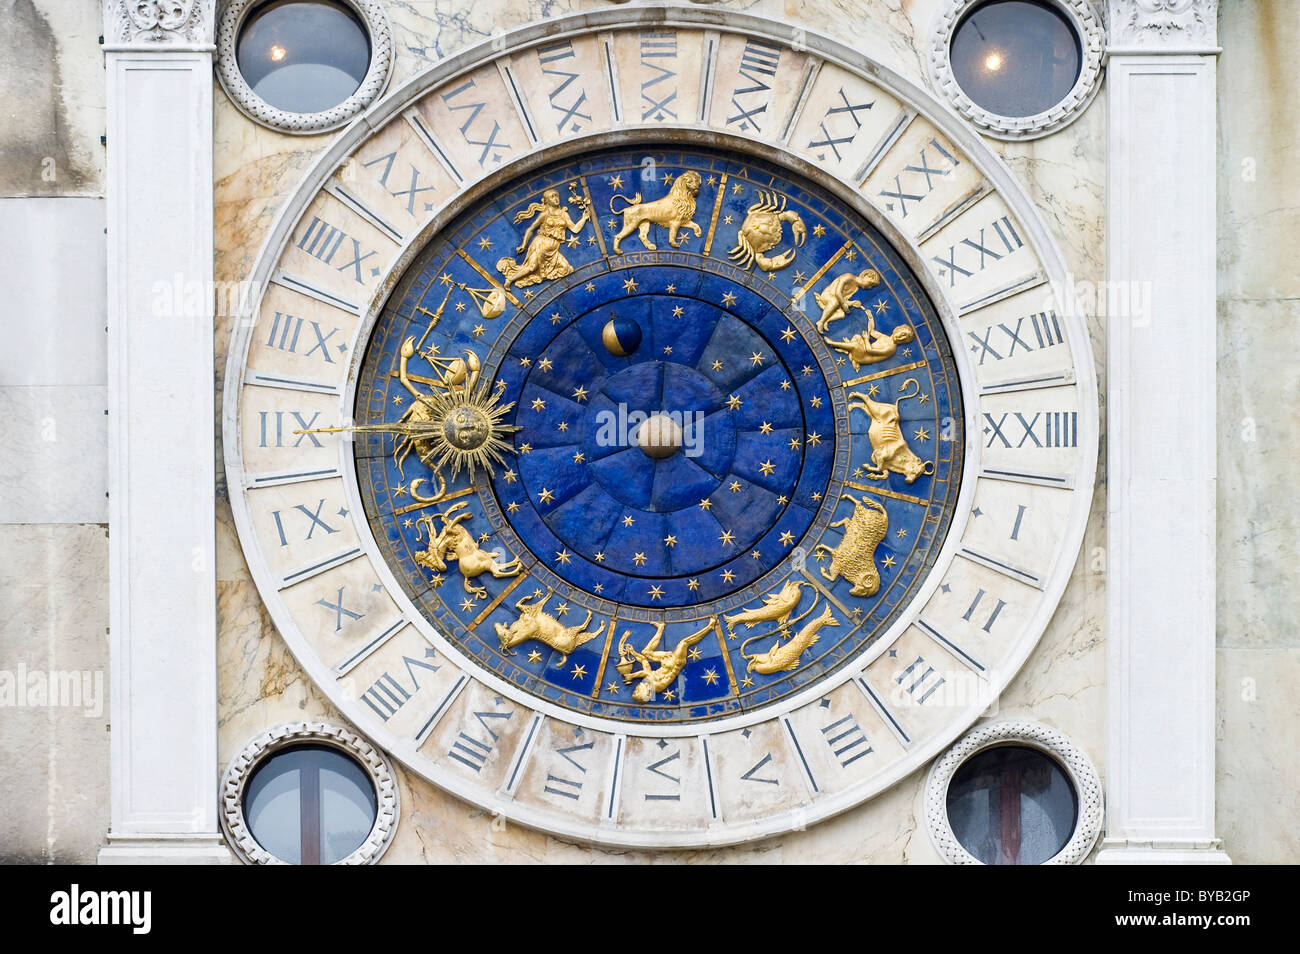 Sundial with signs of the zodiac, St Mark's Cathedral, Piazza San Marco square, Venice, Italy, Europe Stock Photo